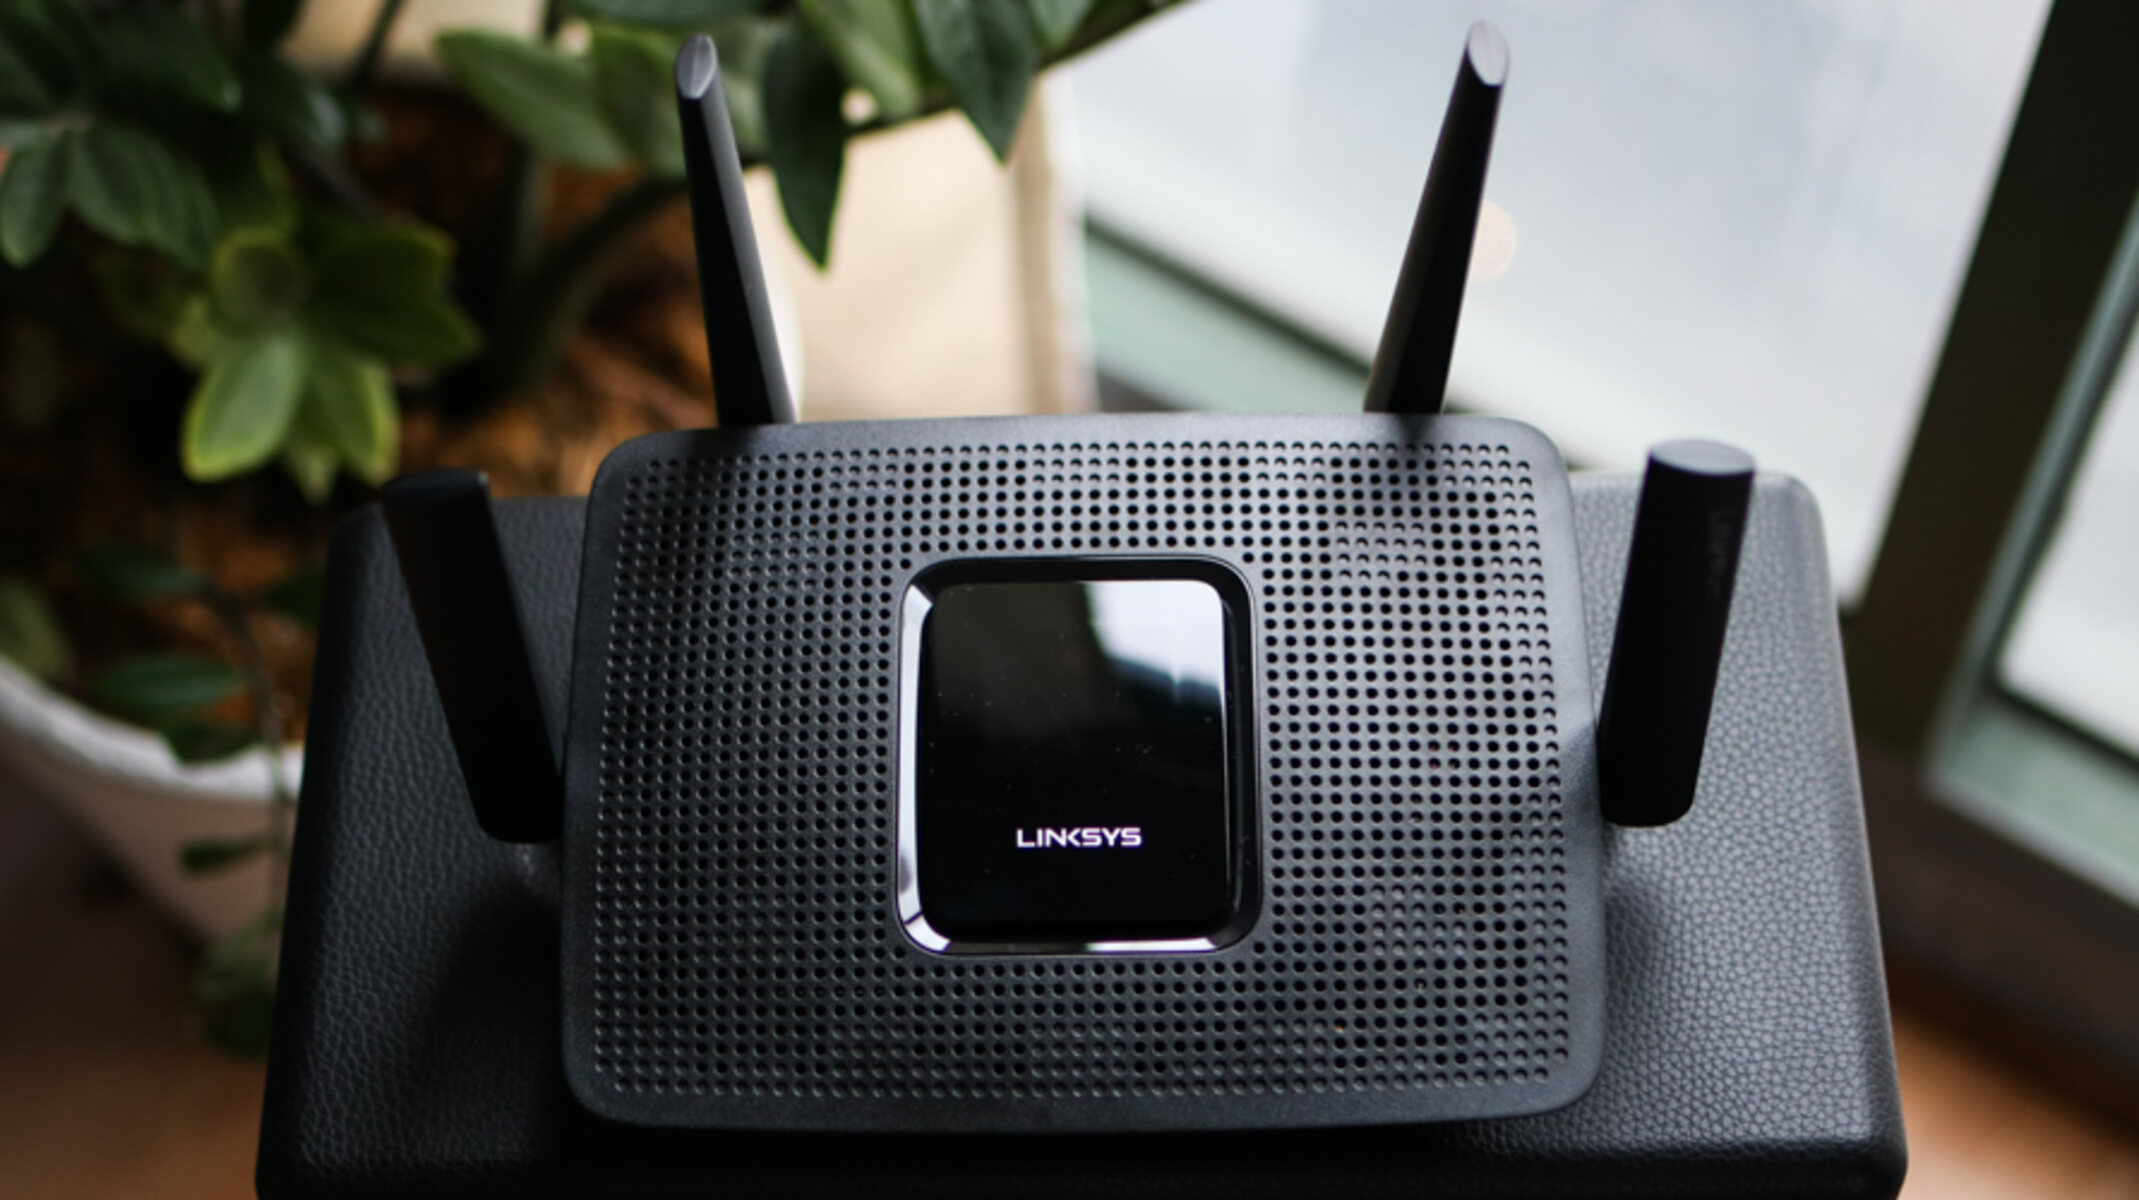 What Is The Linksys Ip Address For Wireless Router